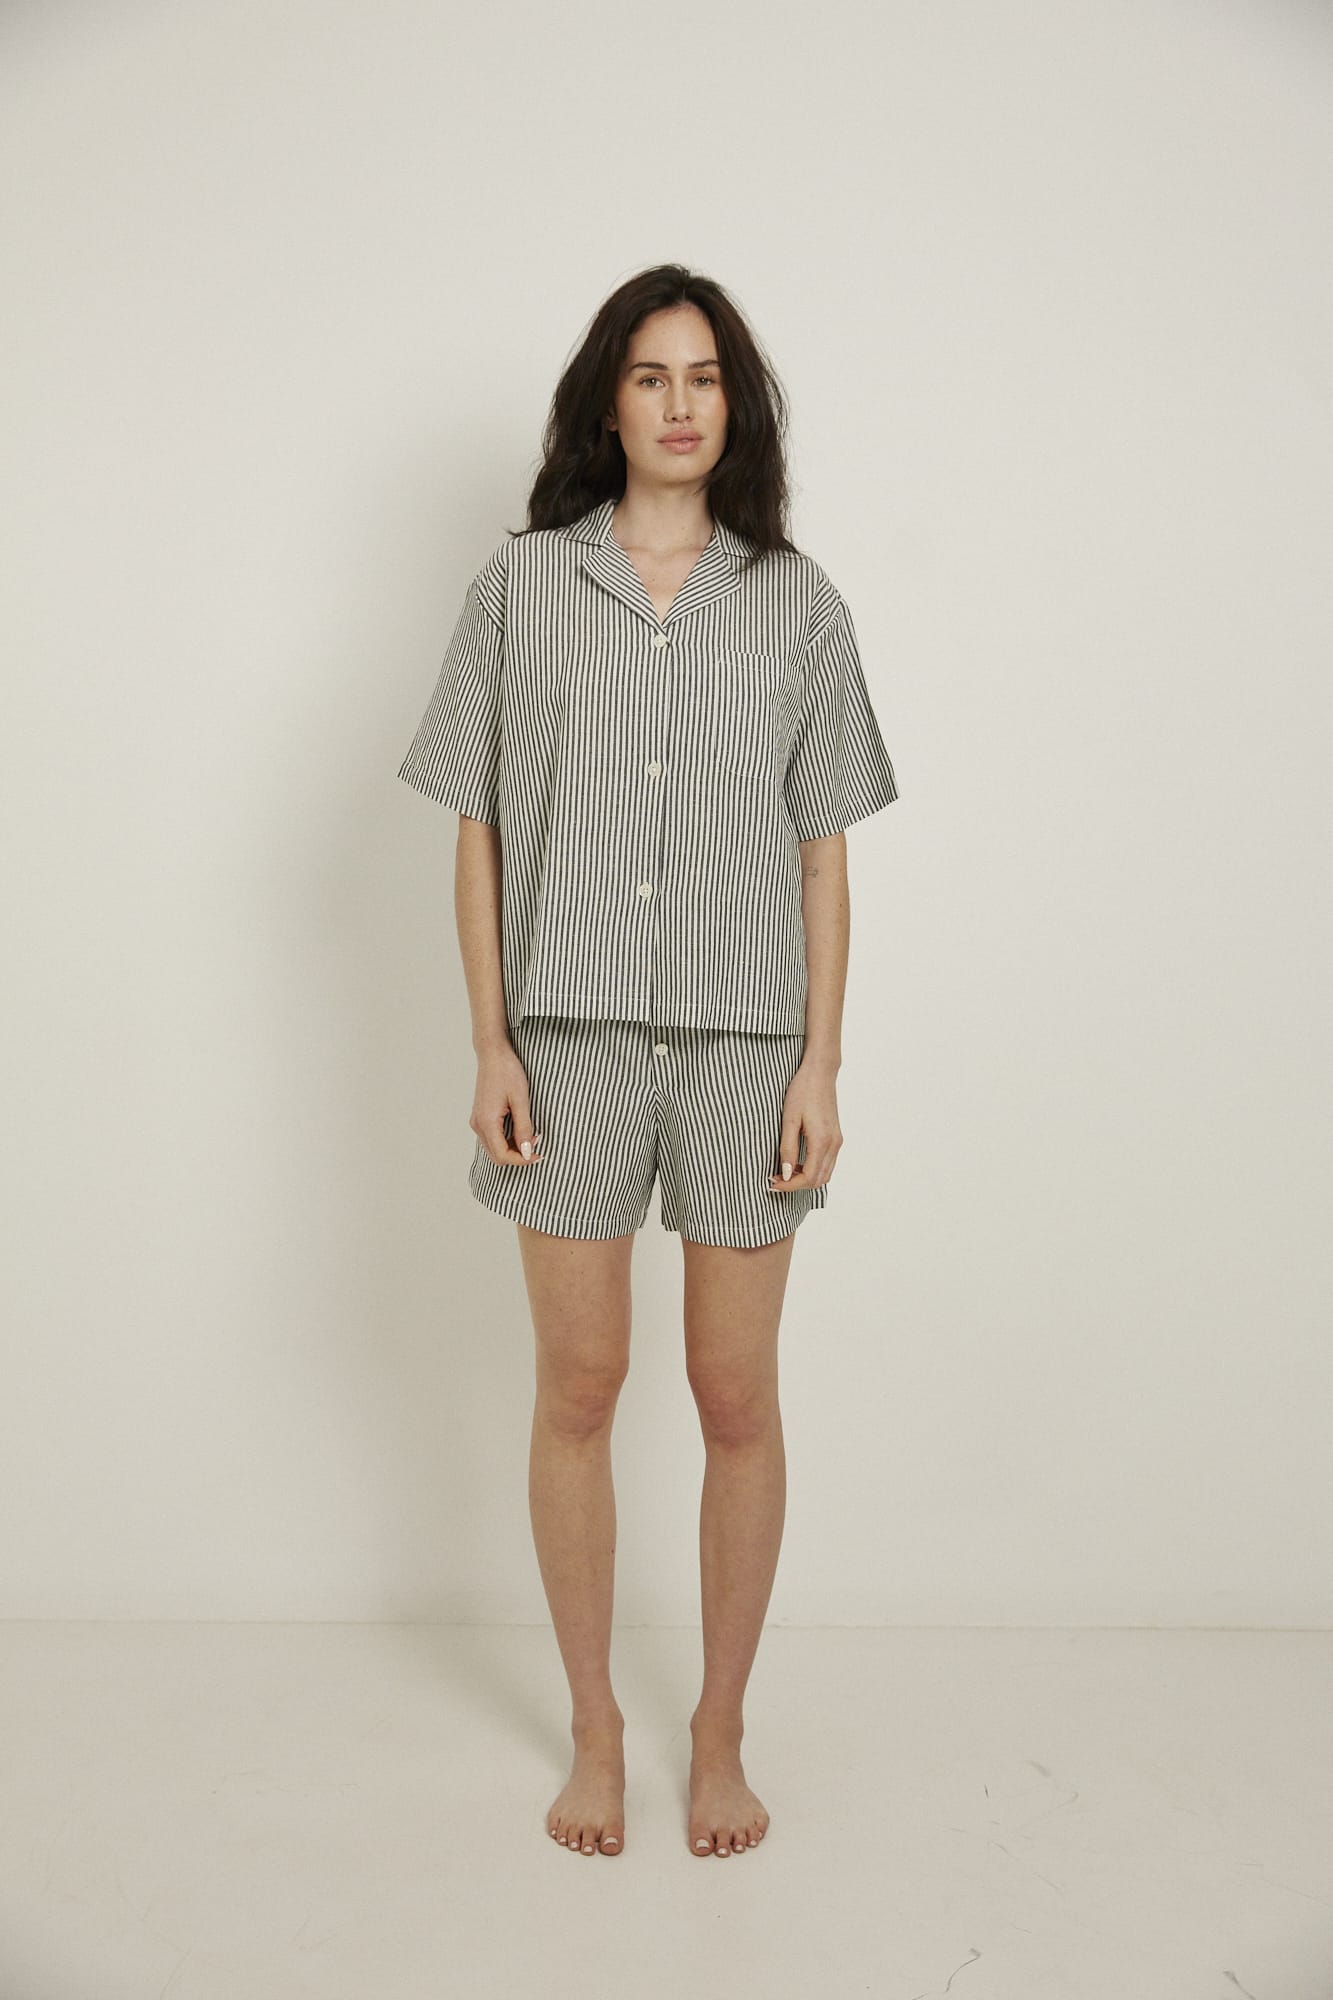 Women’s pyjama set including a short sleeve shirt and shorts. Made from an organic cotton and linen blend, in a black and white stripe.  The shirt has shell buttons, a front pocket and a back pleat with locker loop detail.  The shorts feature natural shell buttons and an elasticated waistband for comfort.